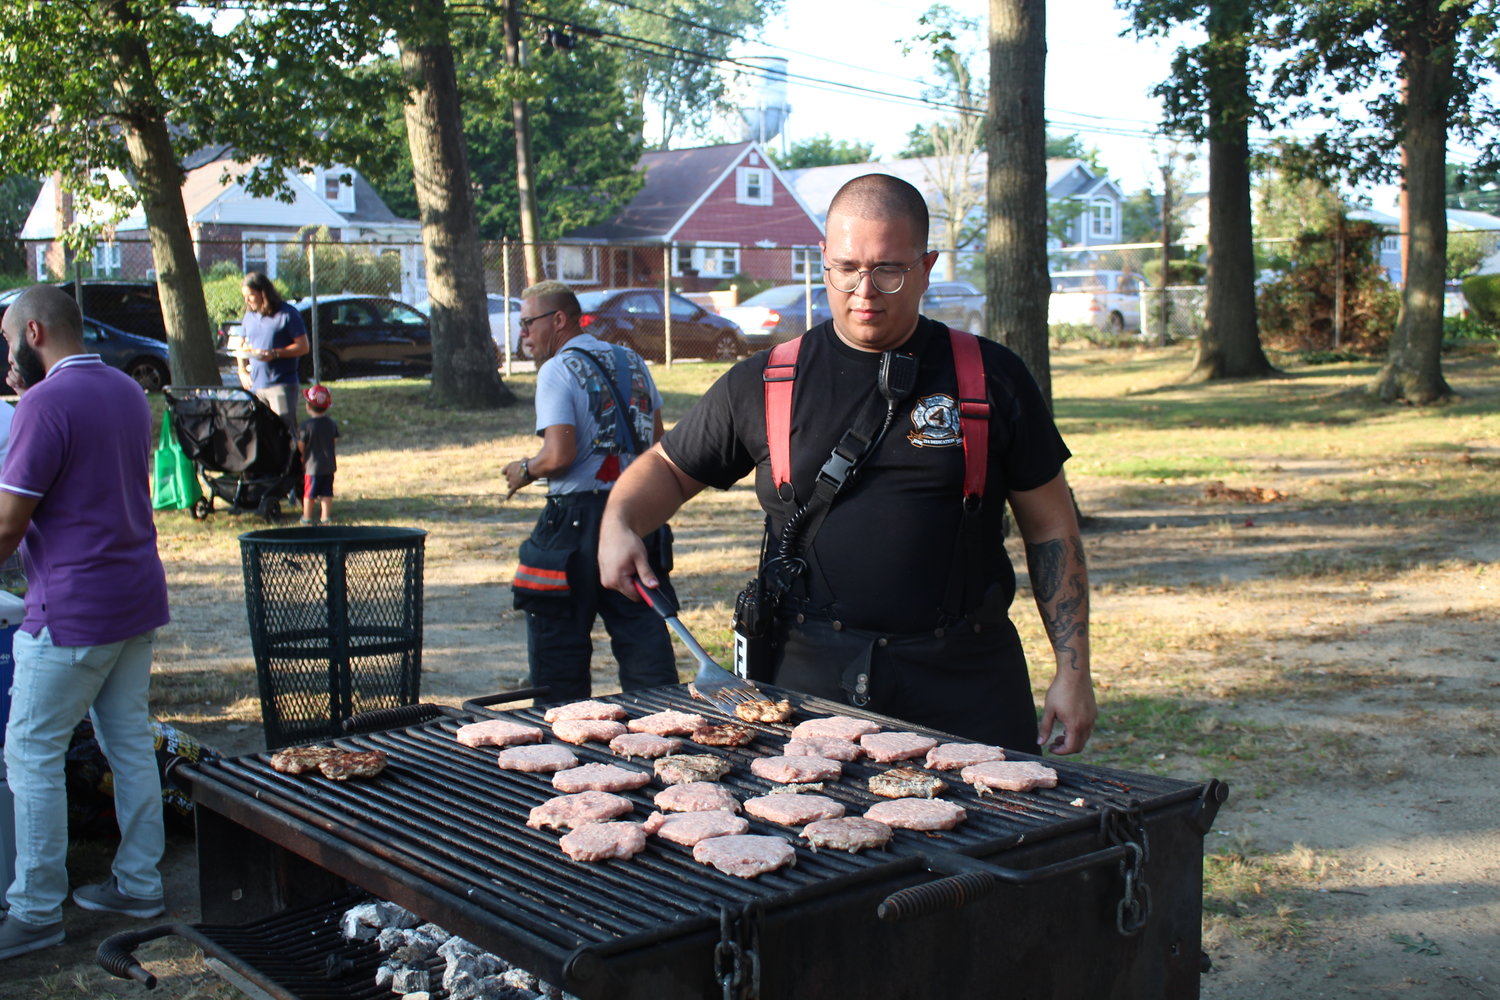 Freeport Firefighter Will Villalobos manned the grill at National Night Out on Aug. 2 at Bishop Frank O. White Park.